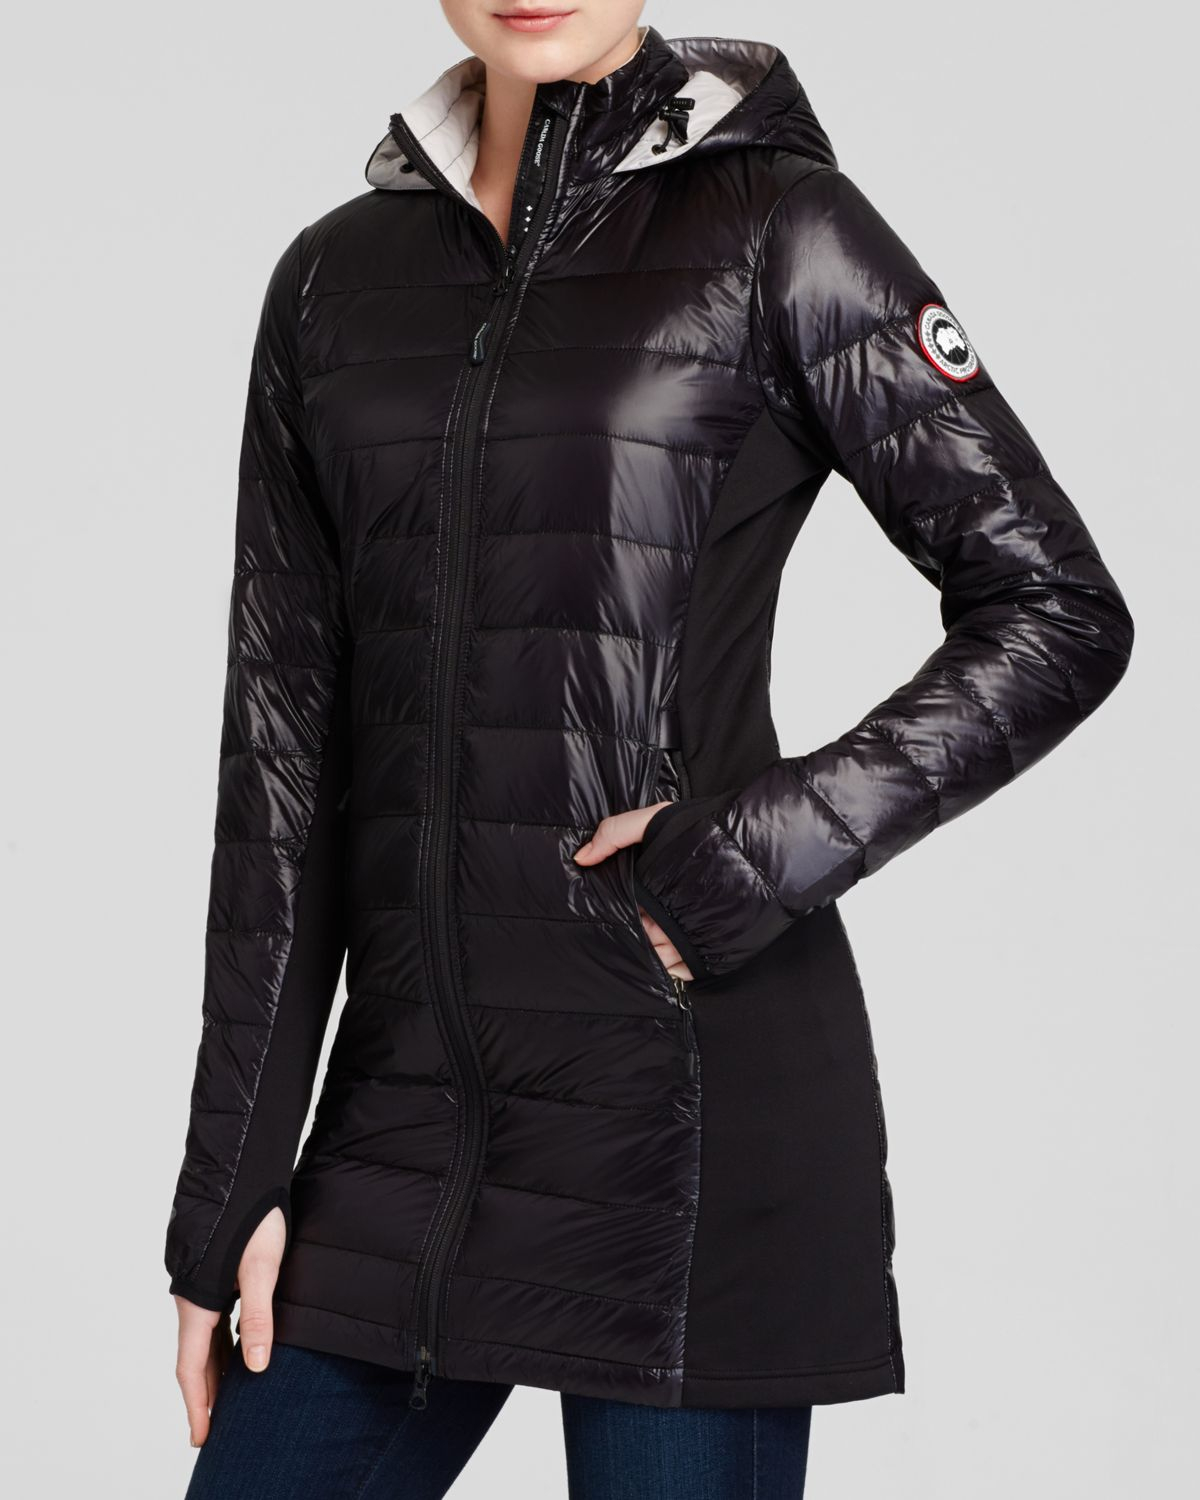 Canada Goose langford parka outlet discounts - Save Up To 50% Off Canada Goose Sale To Bain Cheap On Sale